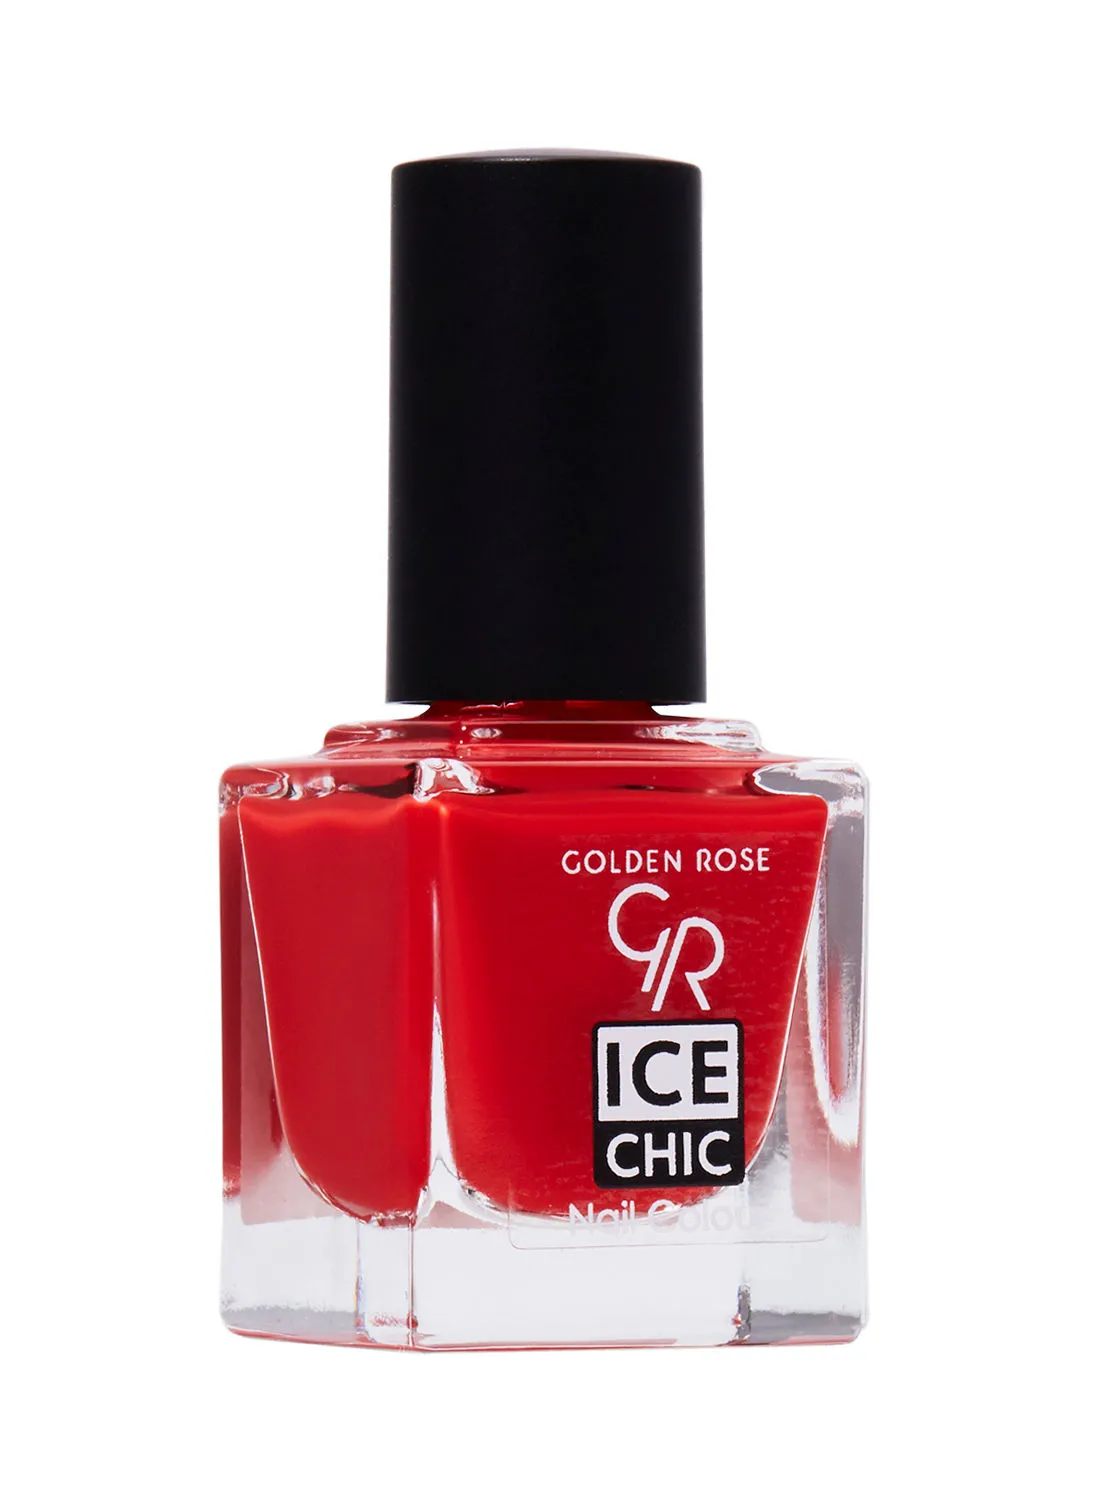 Golden Rose Ice Chic Nail Polish No 37 Red